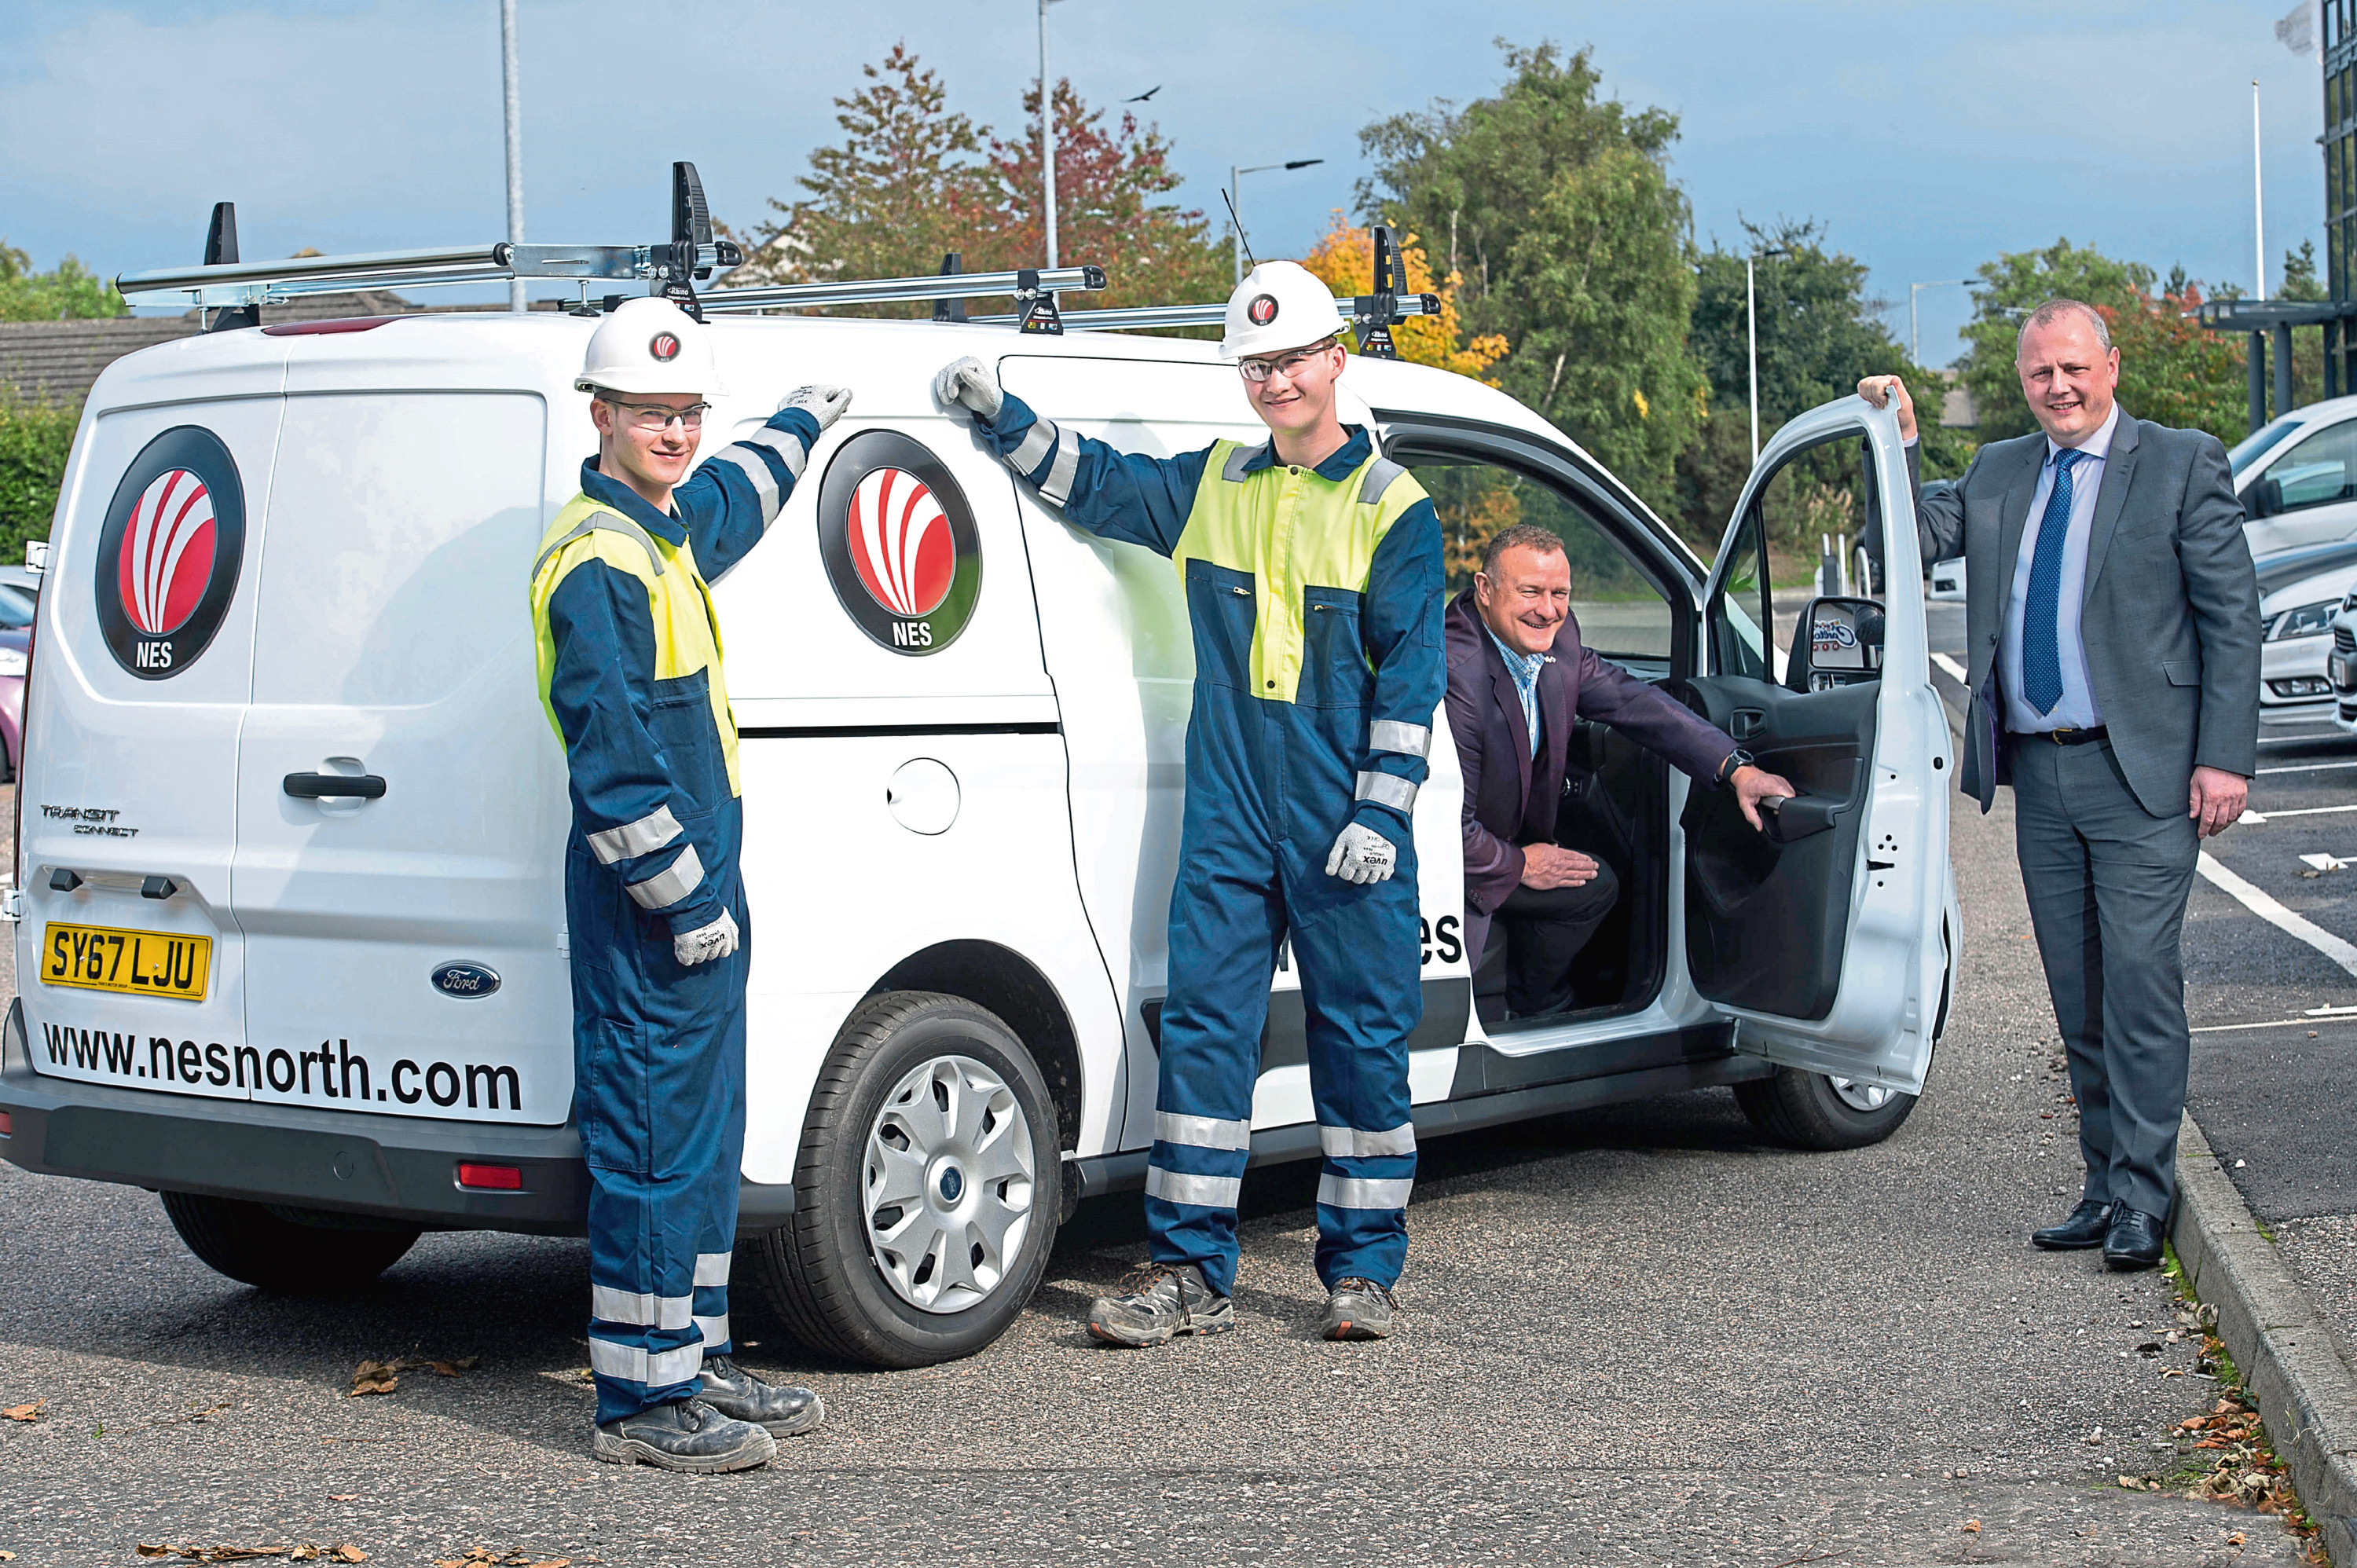 NES Electrical Firm Targets Surge Growth
Drew Hendry MP with
Kenny Duncan, NES managing director
with  Apprentices  Tyler Whitty (17) and Kyle Livingstone (18

Picture by Trevor Martin.